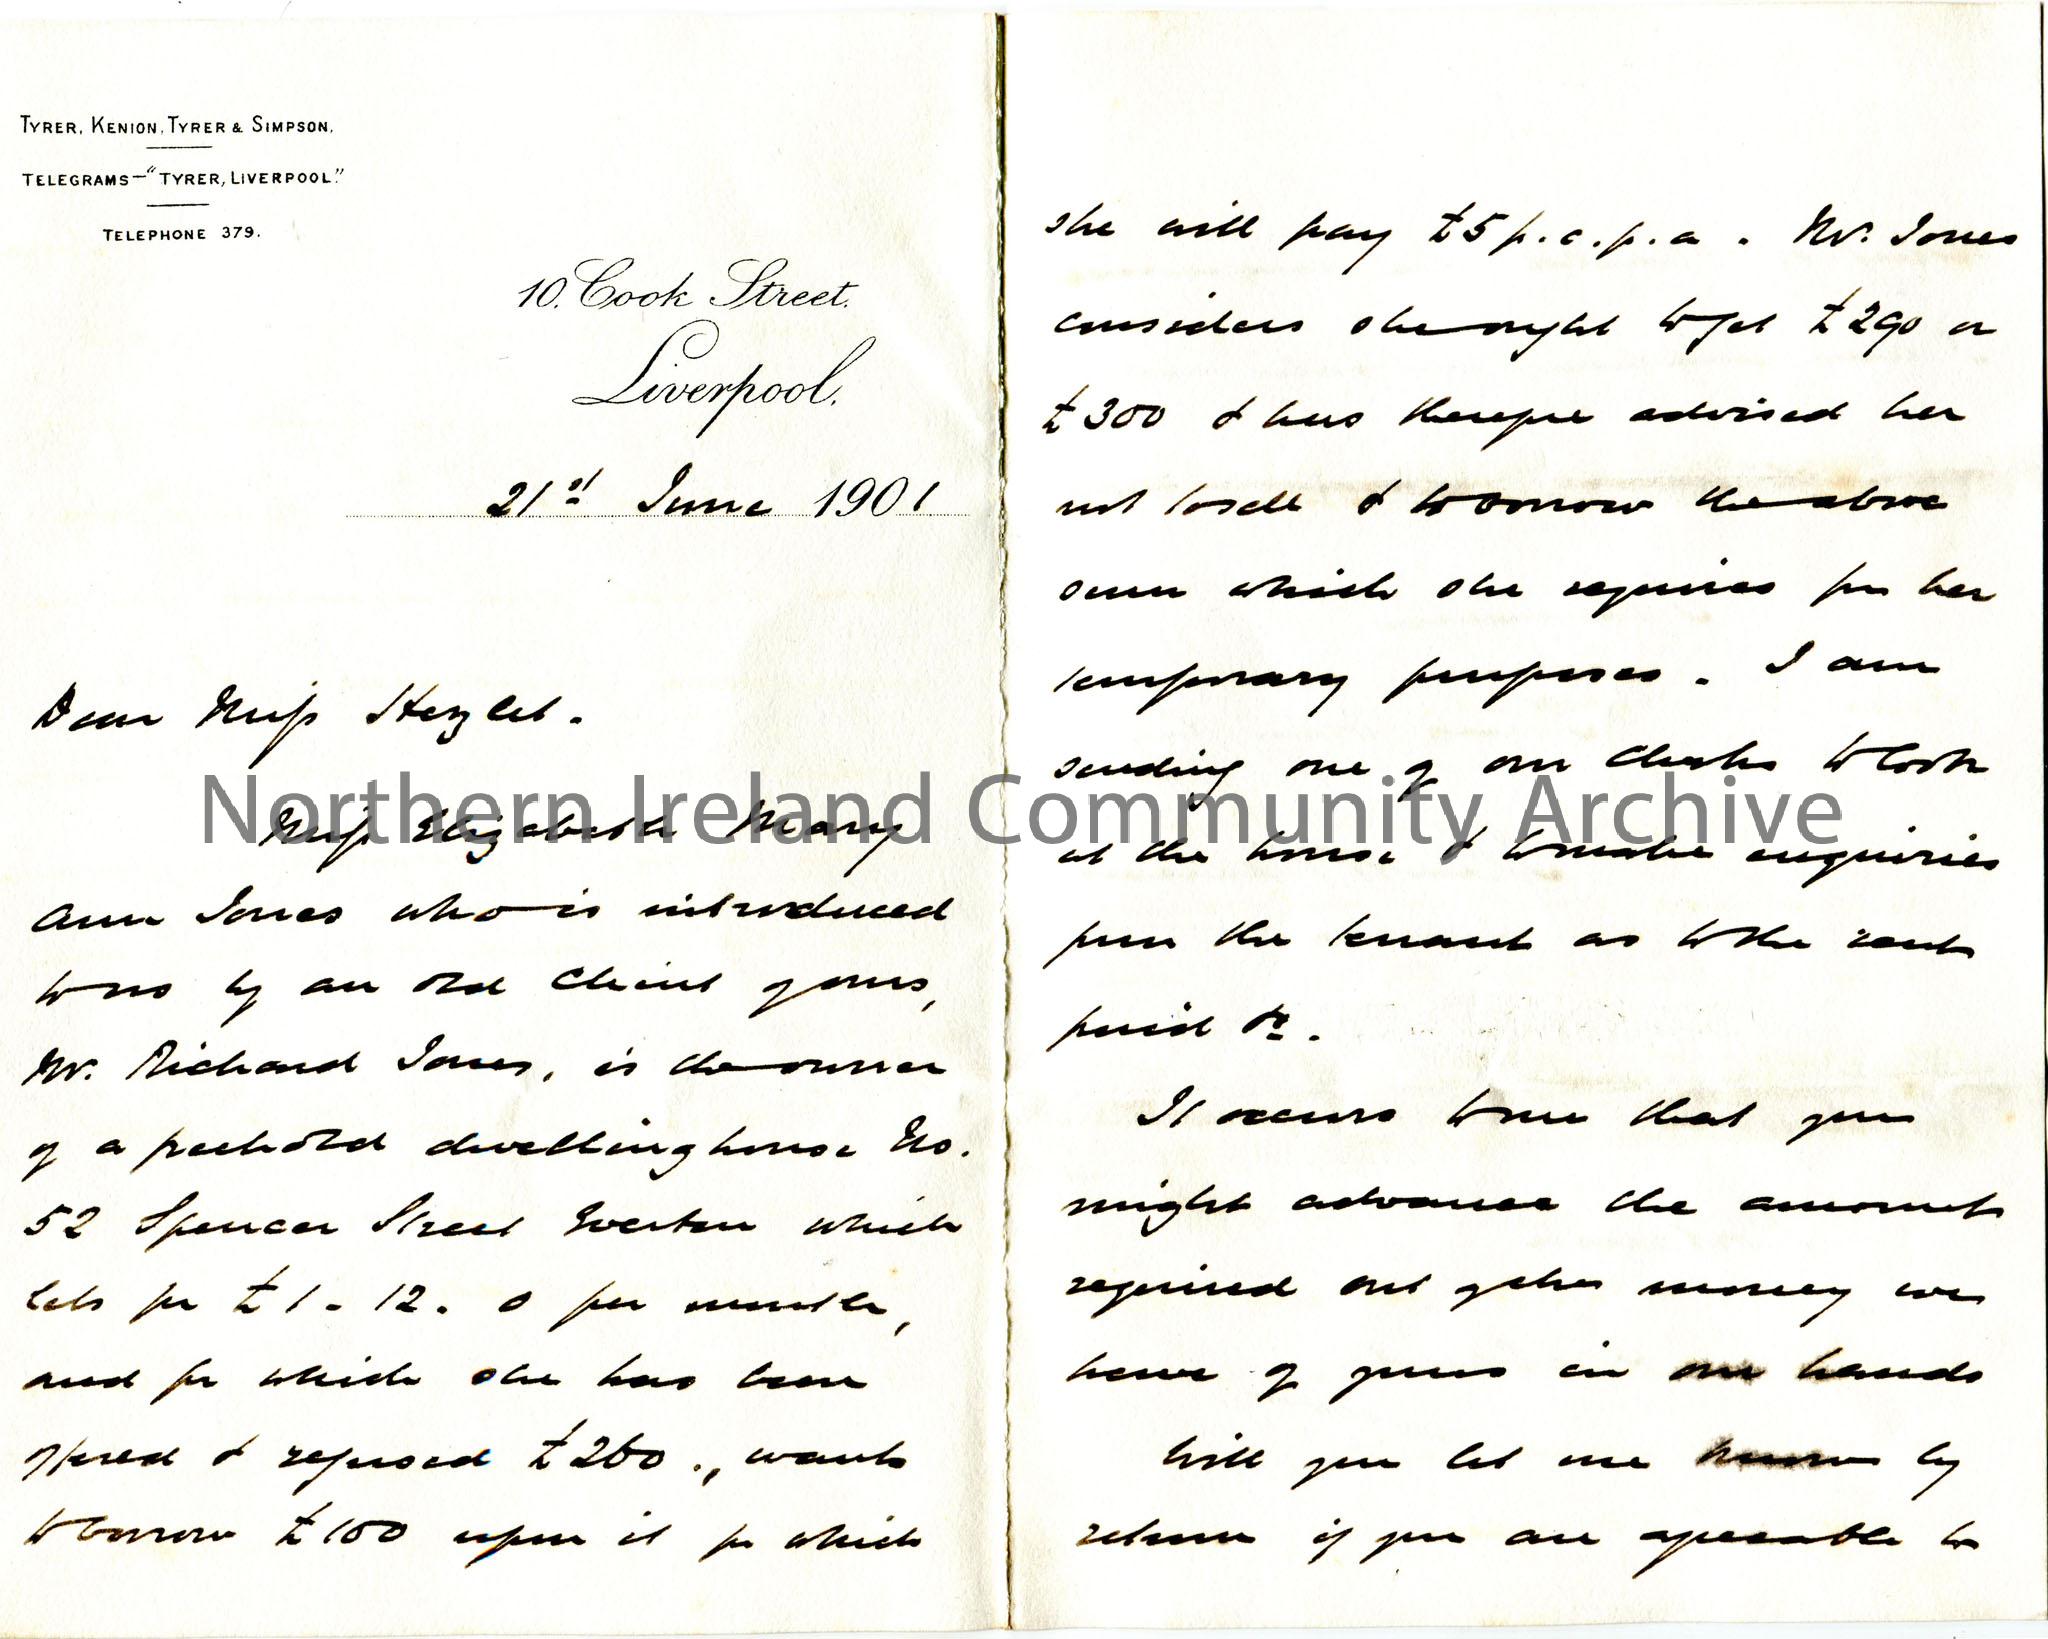 Handwritten letter, double sided, to Miss Hezlet at Rockryan, Portrush, Ireland. Informs Miss Hezlet of a property at 52 Spencer Street, Everton, Live…